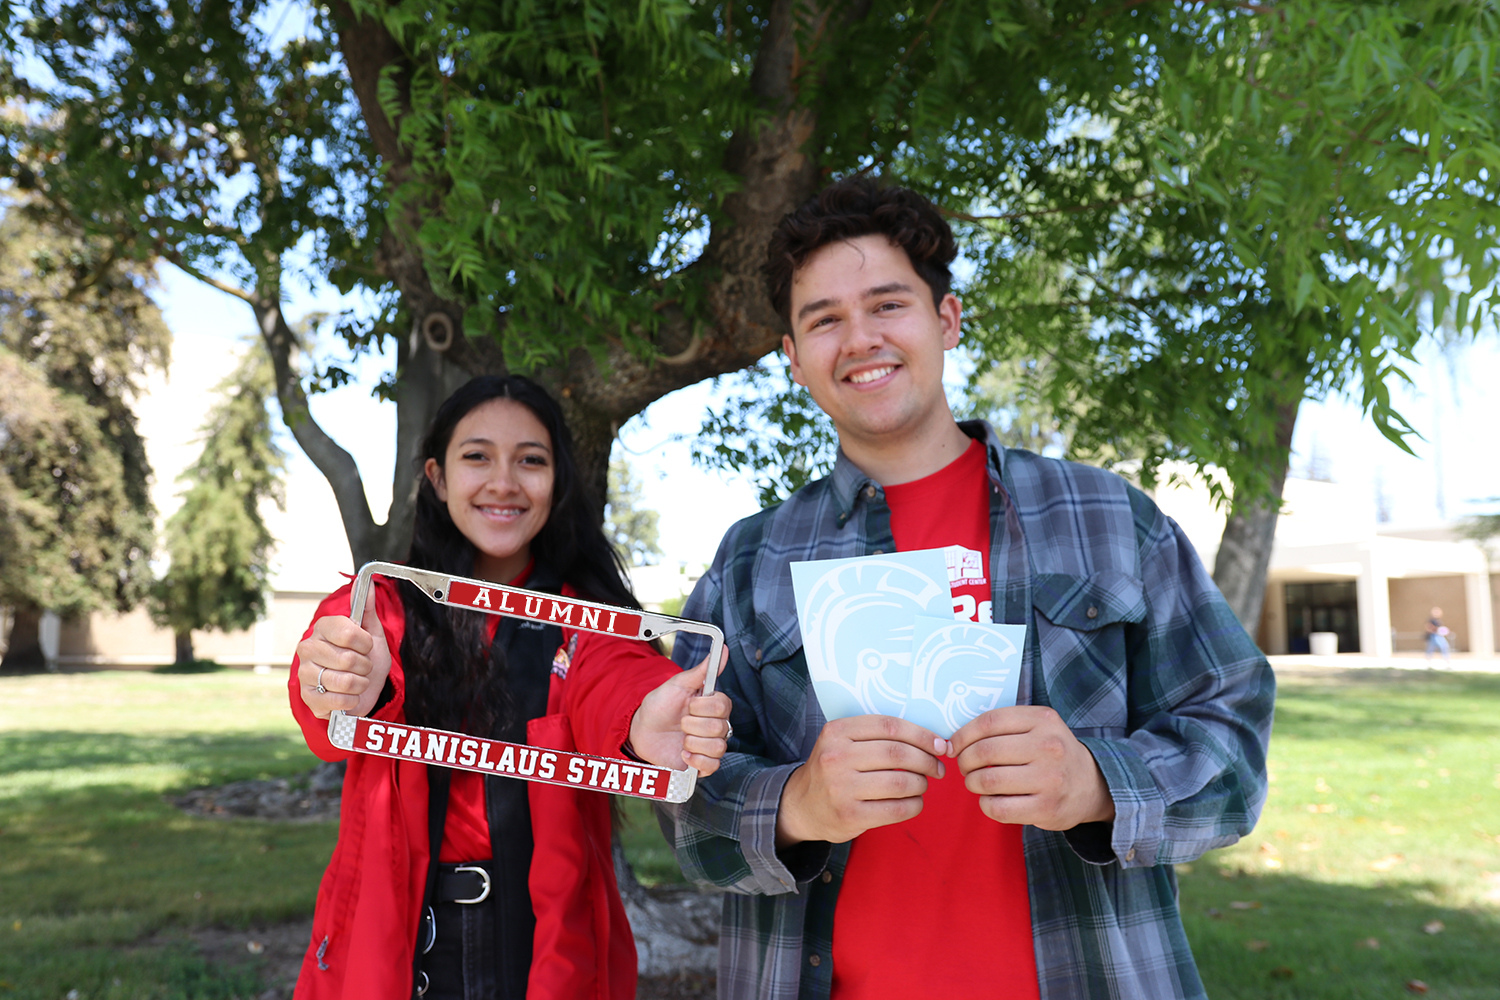 Two students holding alumni license plates and decals.